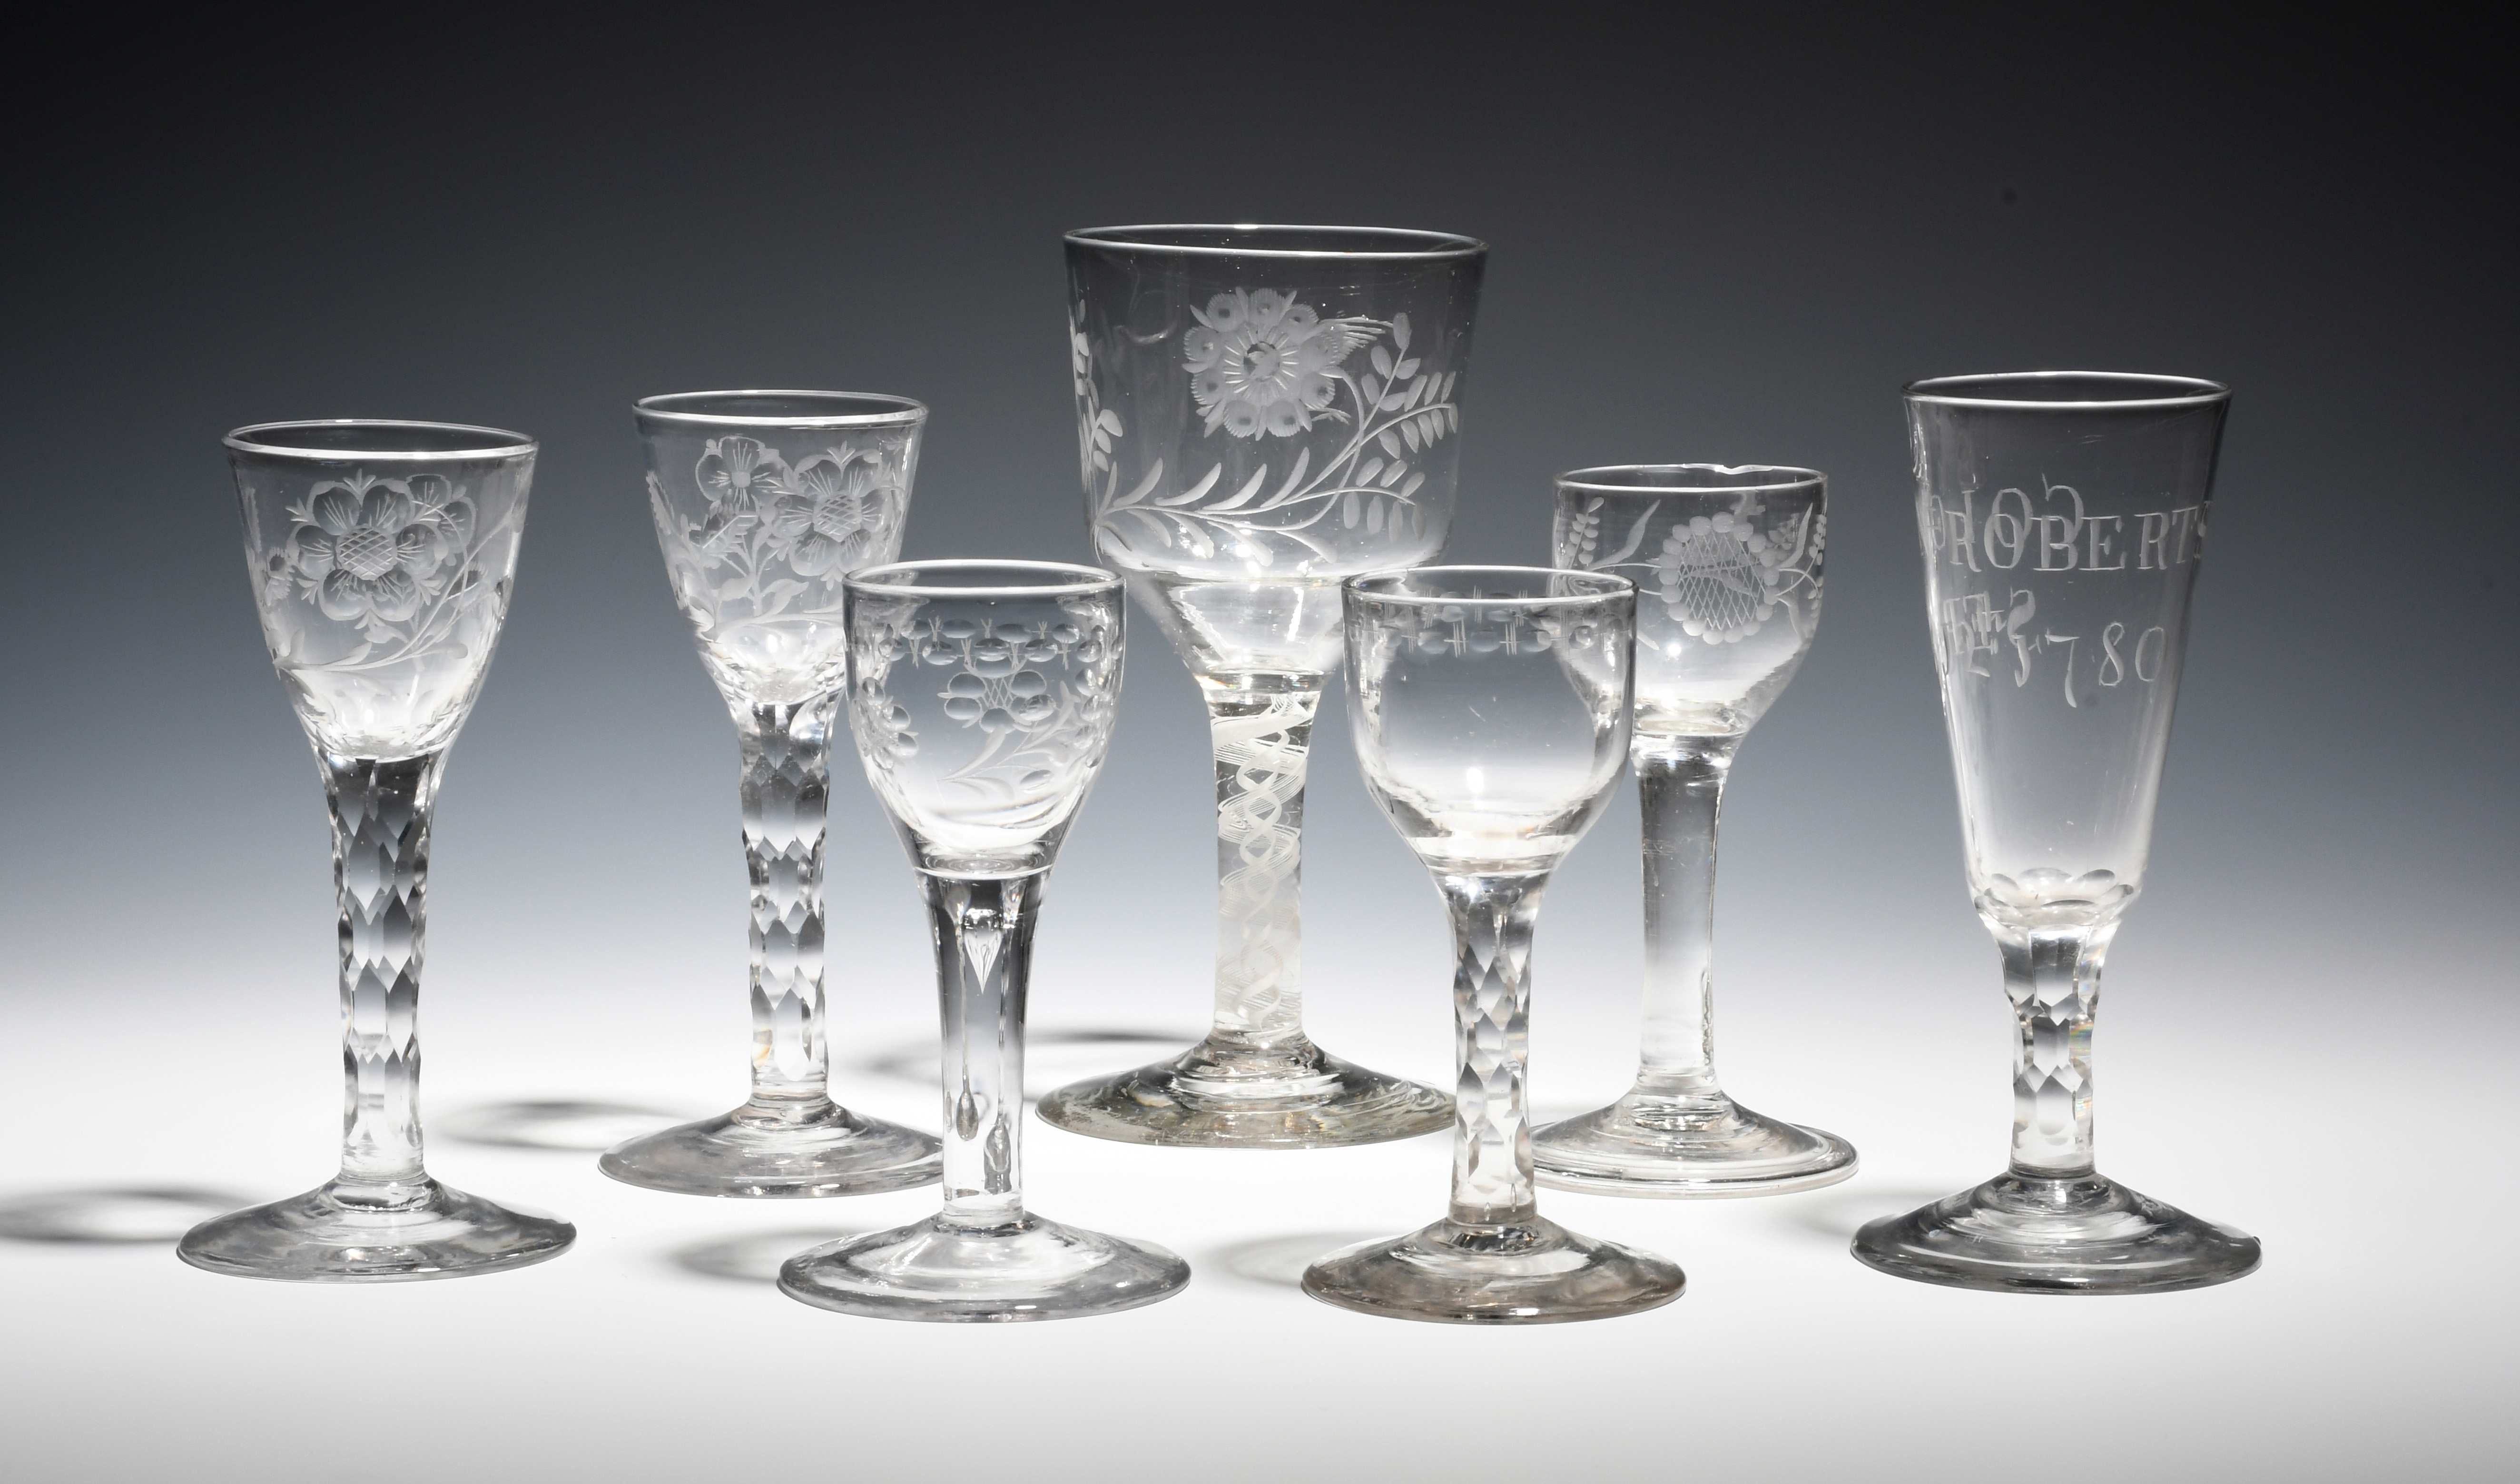 Seven wine glasses c.1760-85, one with a generous ogee bowl engraved with a bird and rose spray on a